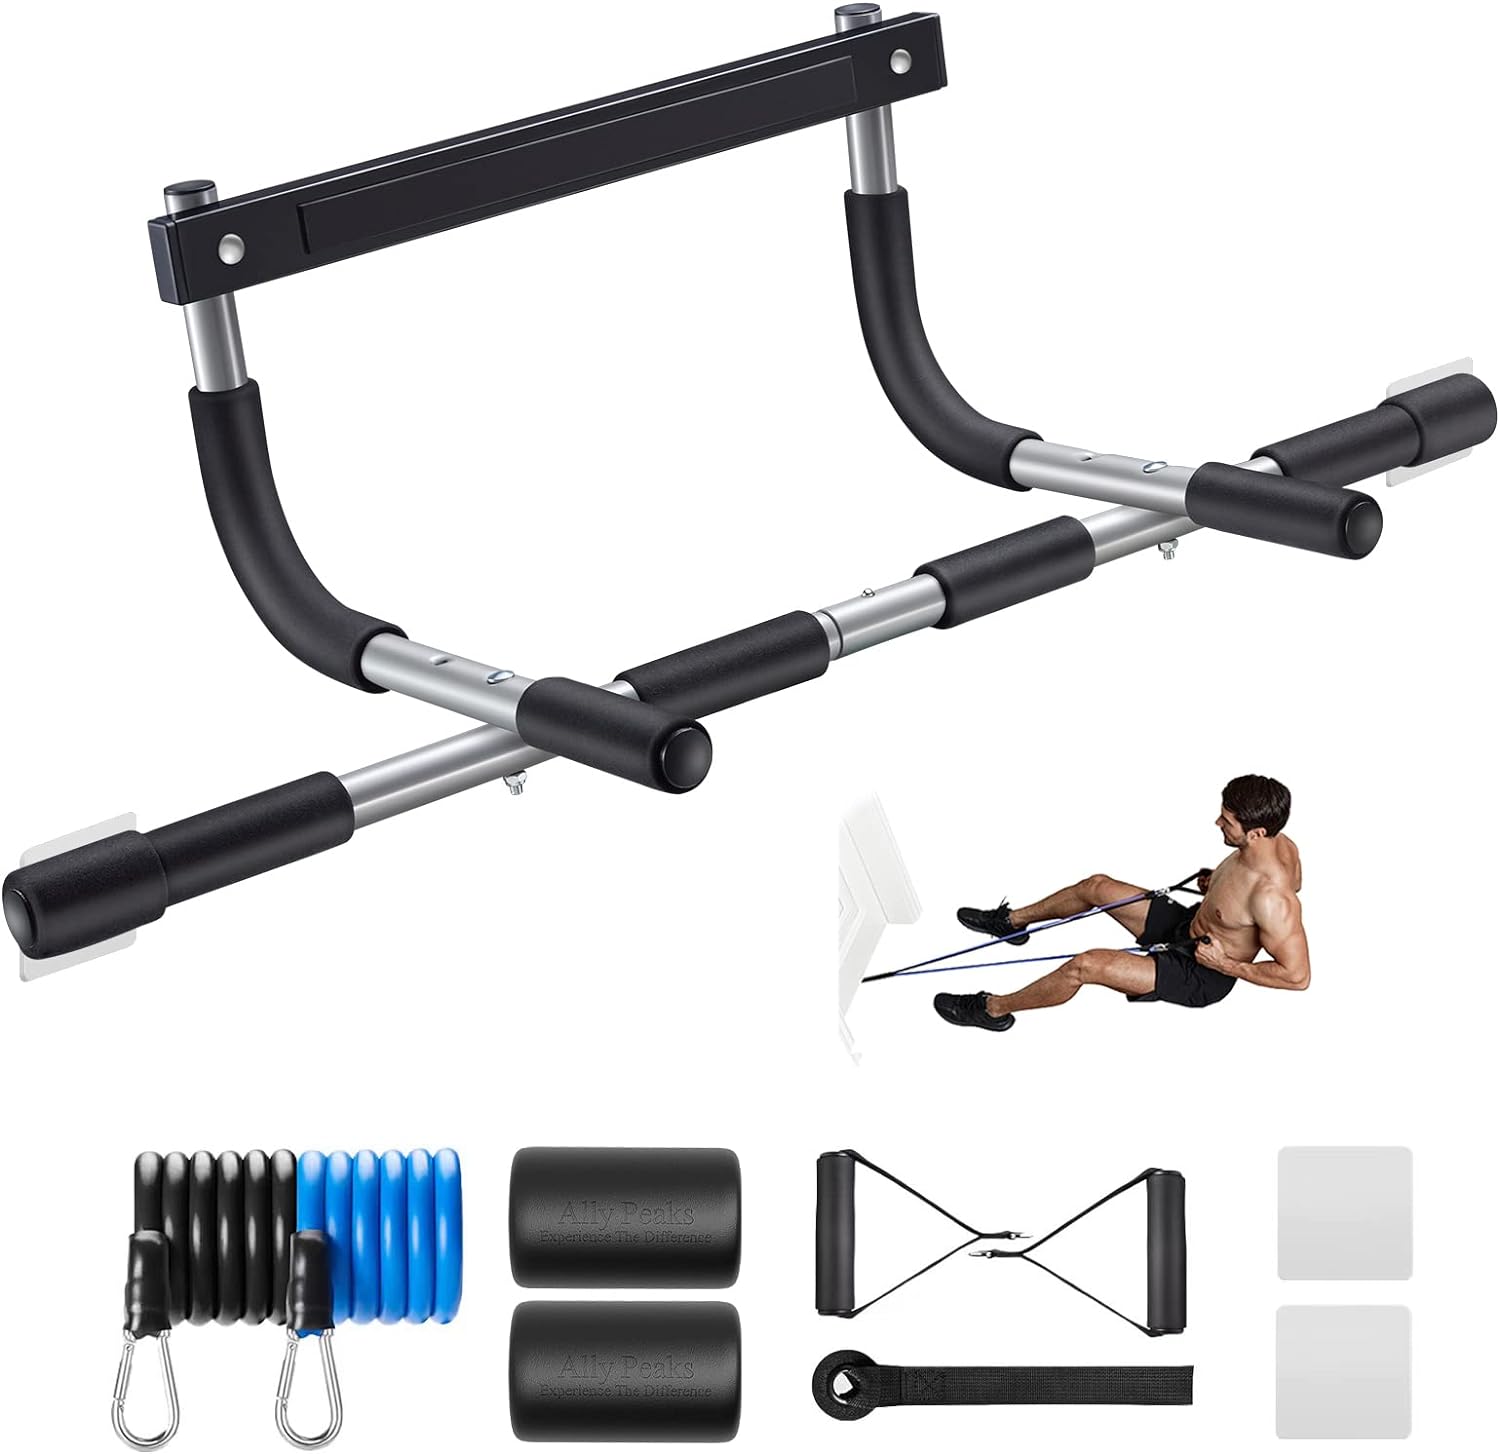 Ally Peaks Pull Up Bar for Doorway | Thickened Steel Max Limit 440 lbs Upper Body Fitness Workout Bar| Multi-Grip Strength for Doorway | Indoor Chin-Up Bar Fitness Trainer for Home Gym Portable |180